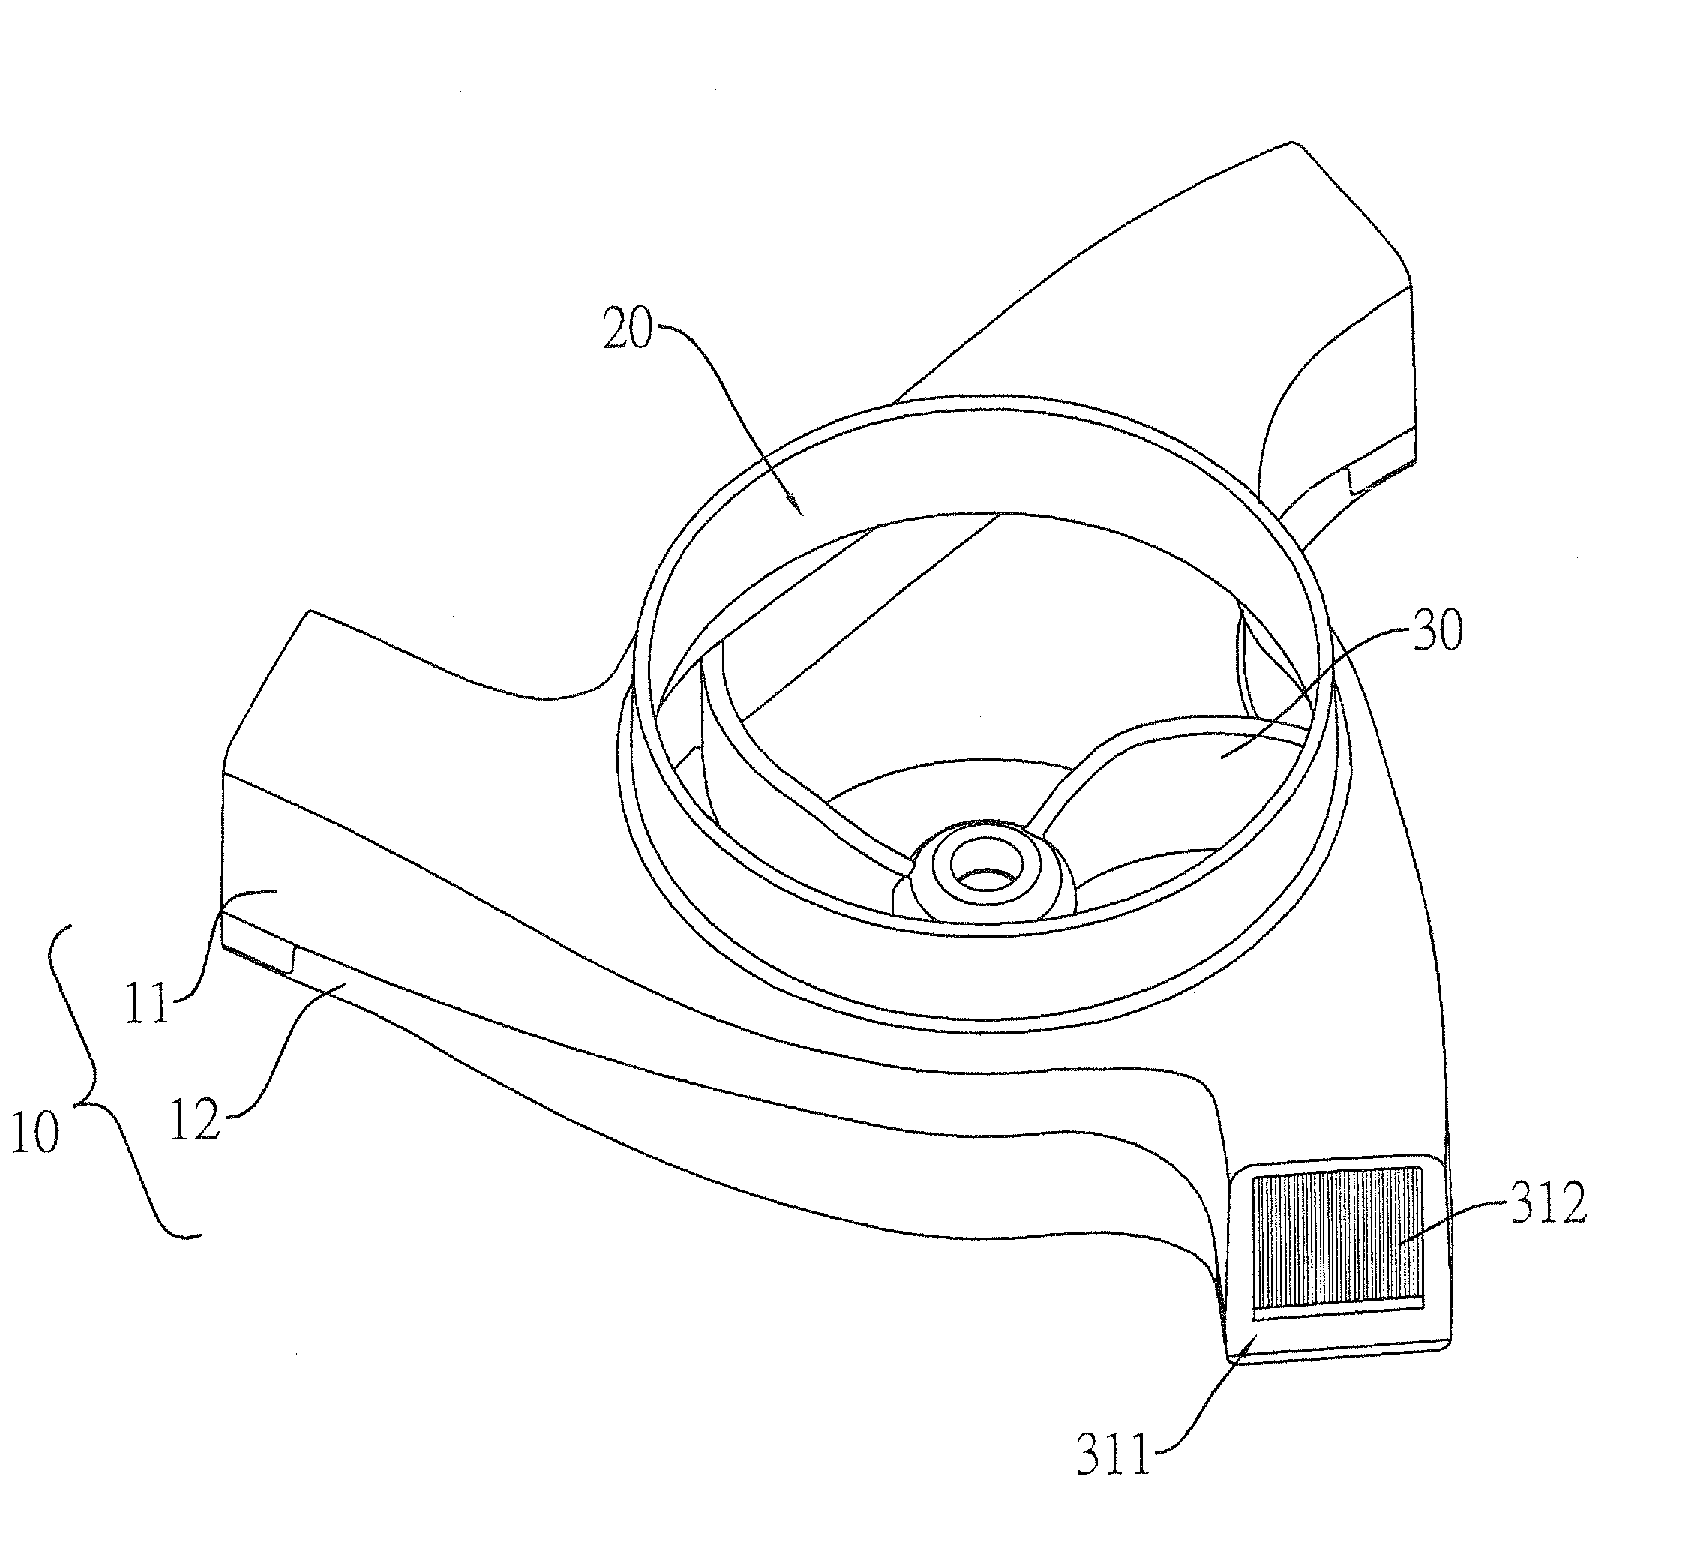 Feed carrier receptacle for use in rotary feed dispensing mechanism